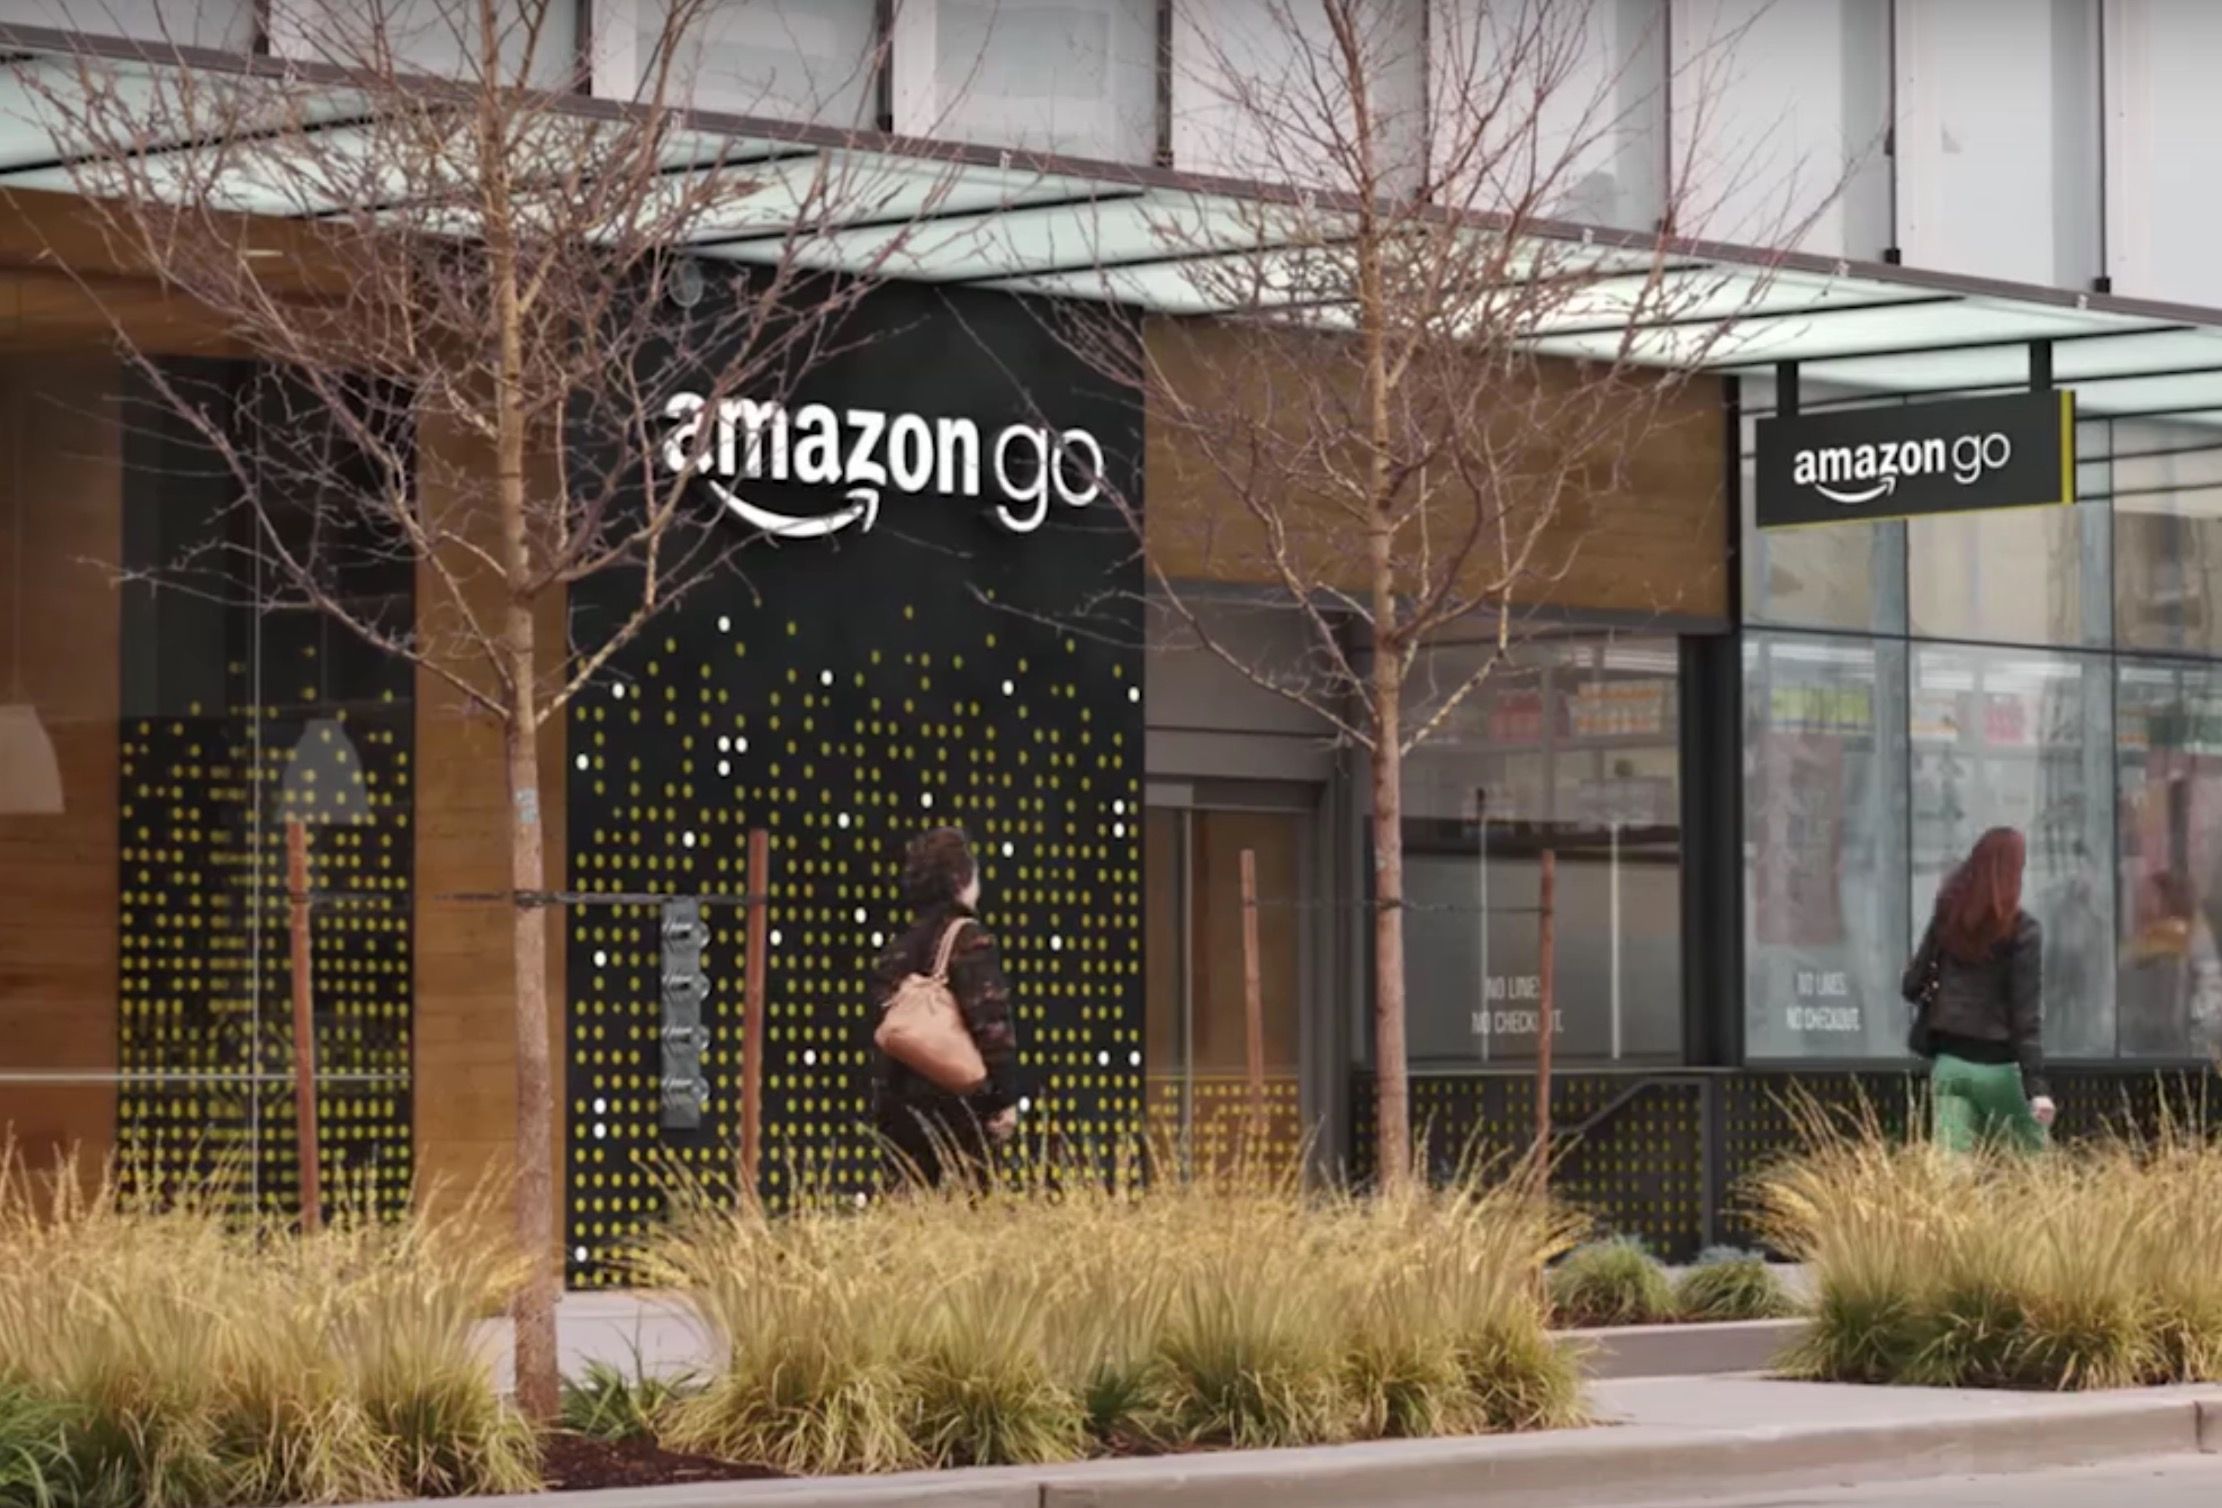 Amazon's Just Walk Out tech rolling out to Hudson airport stores photo 1